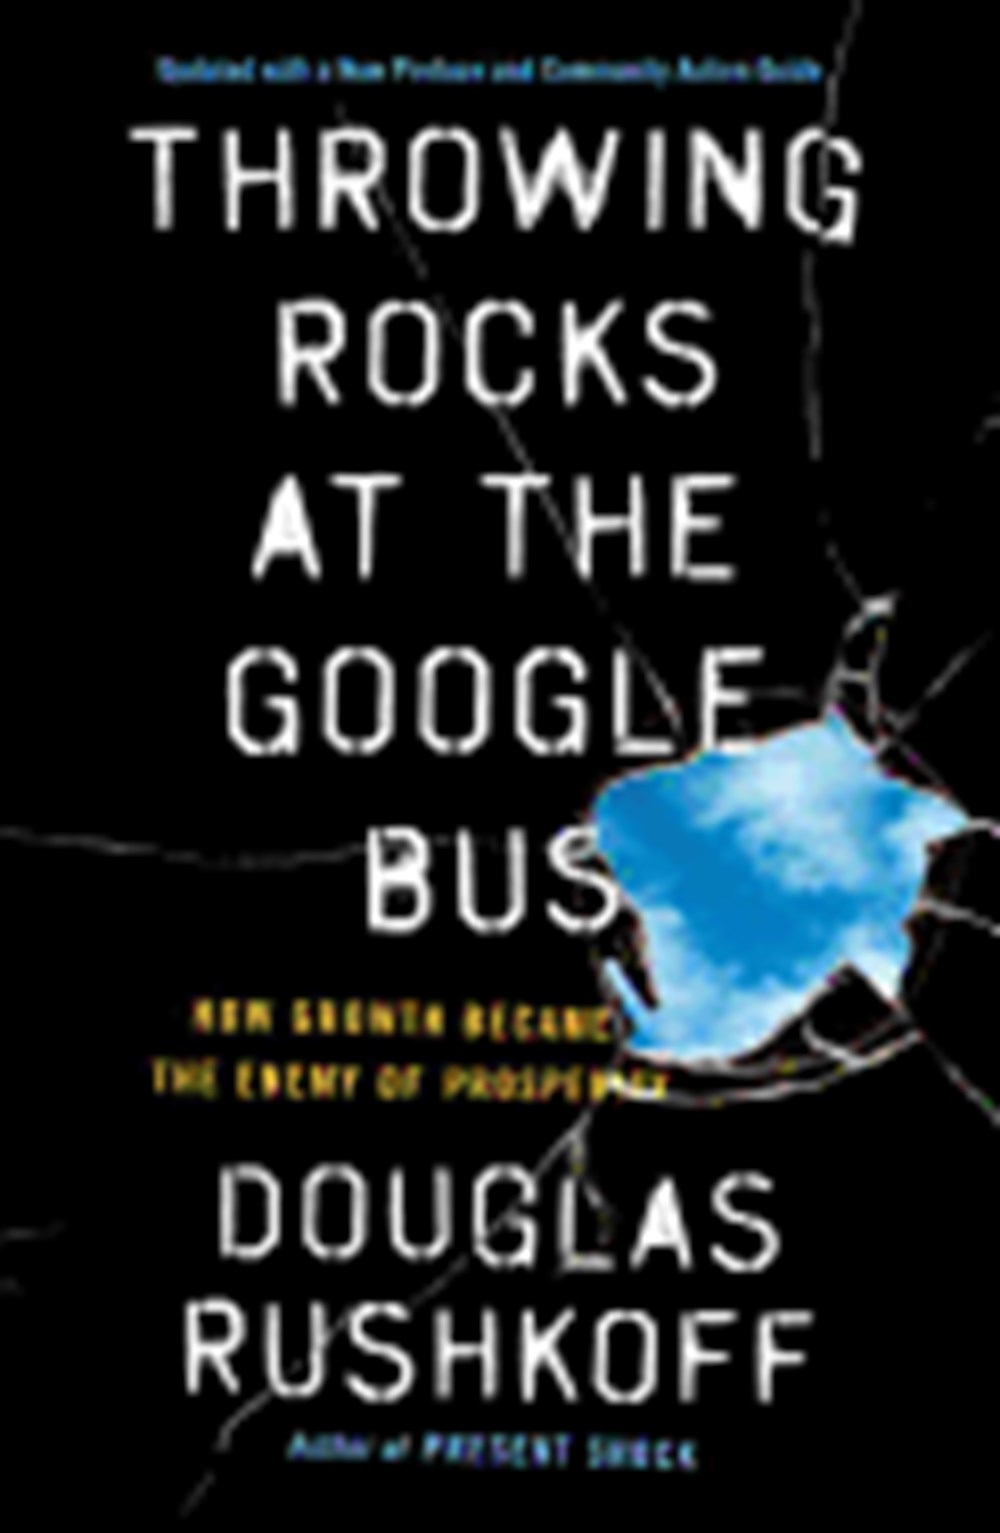 Throwing Rocks at the Google Bus How Growth Became the Enemy of Prosperity